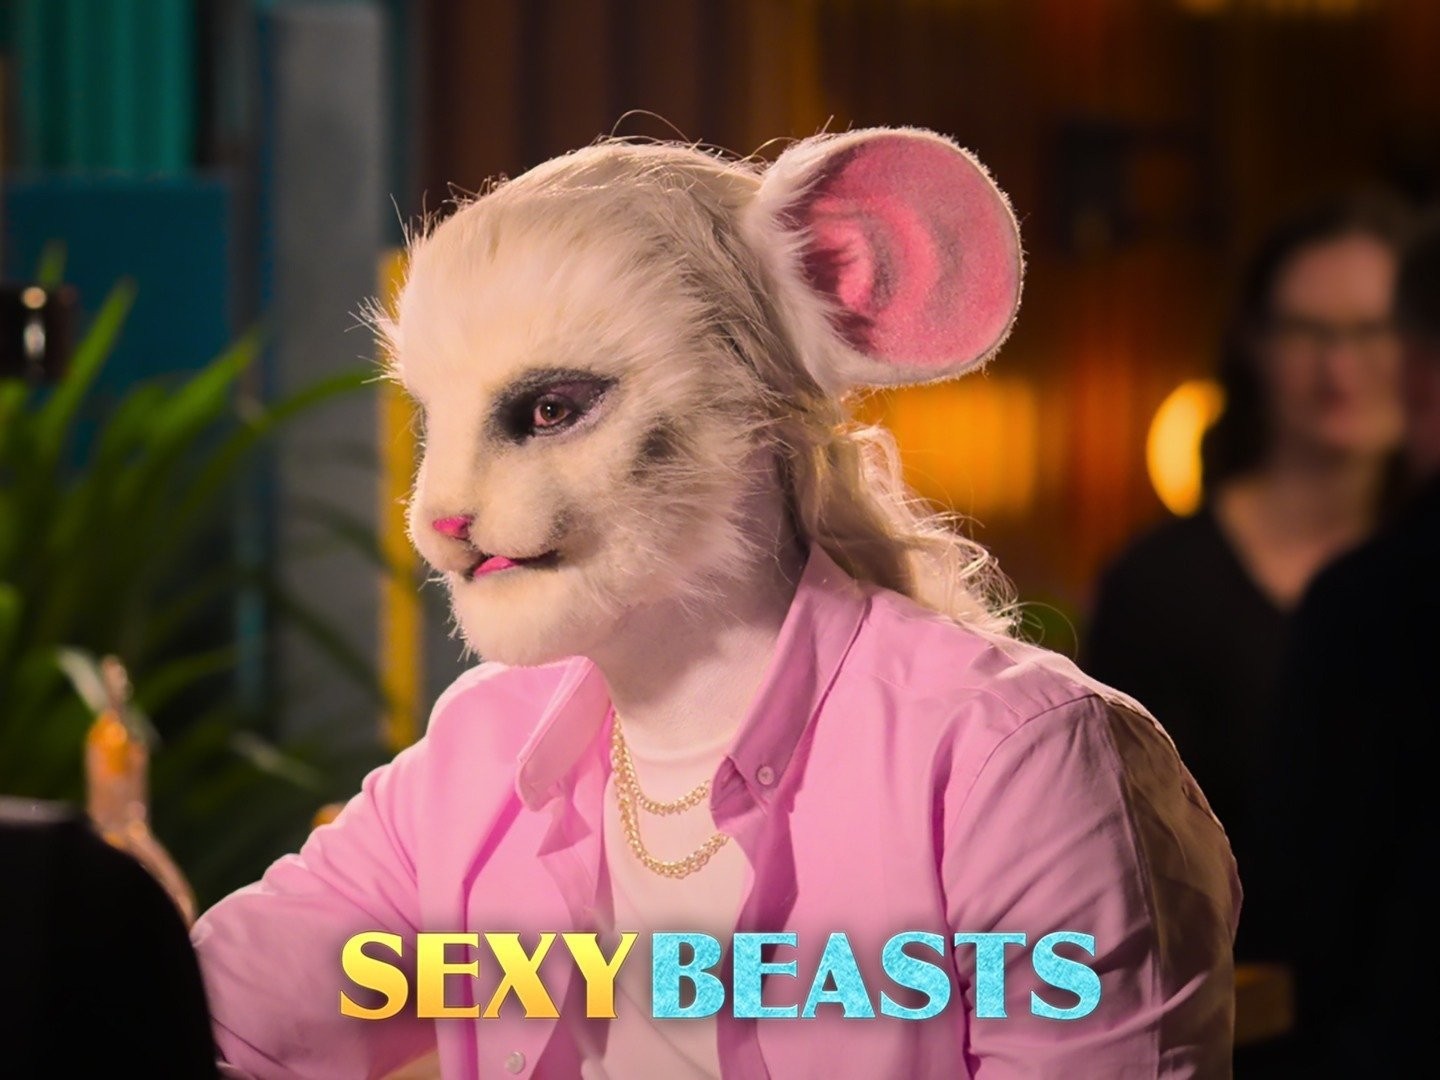 avicienna indrajid recommends sexy beast rotten tomatoes pic